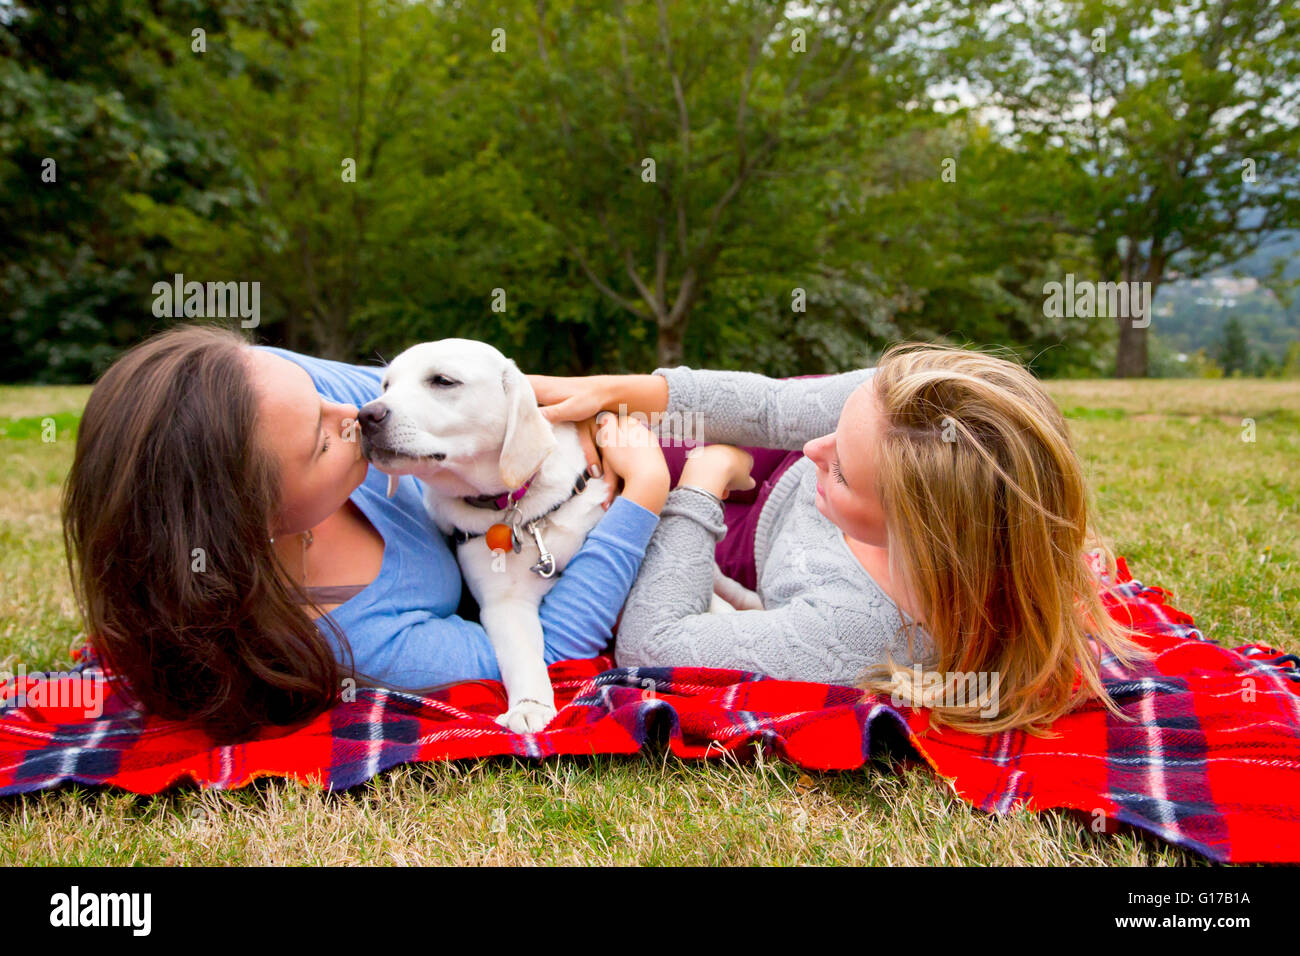 Two young women with pet dog, lying on blanket in park Stock Photo